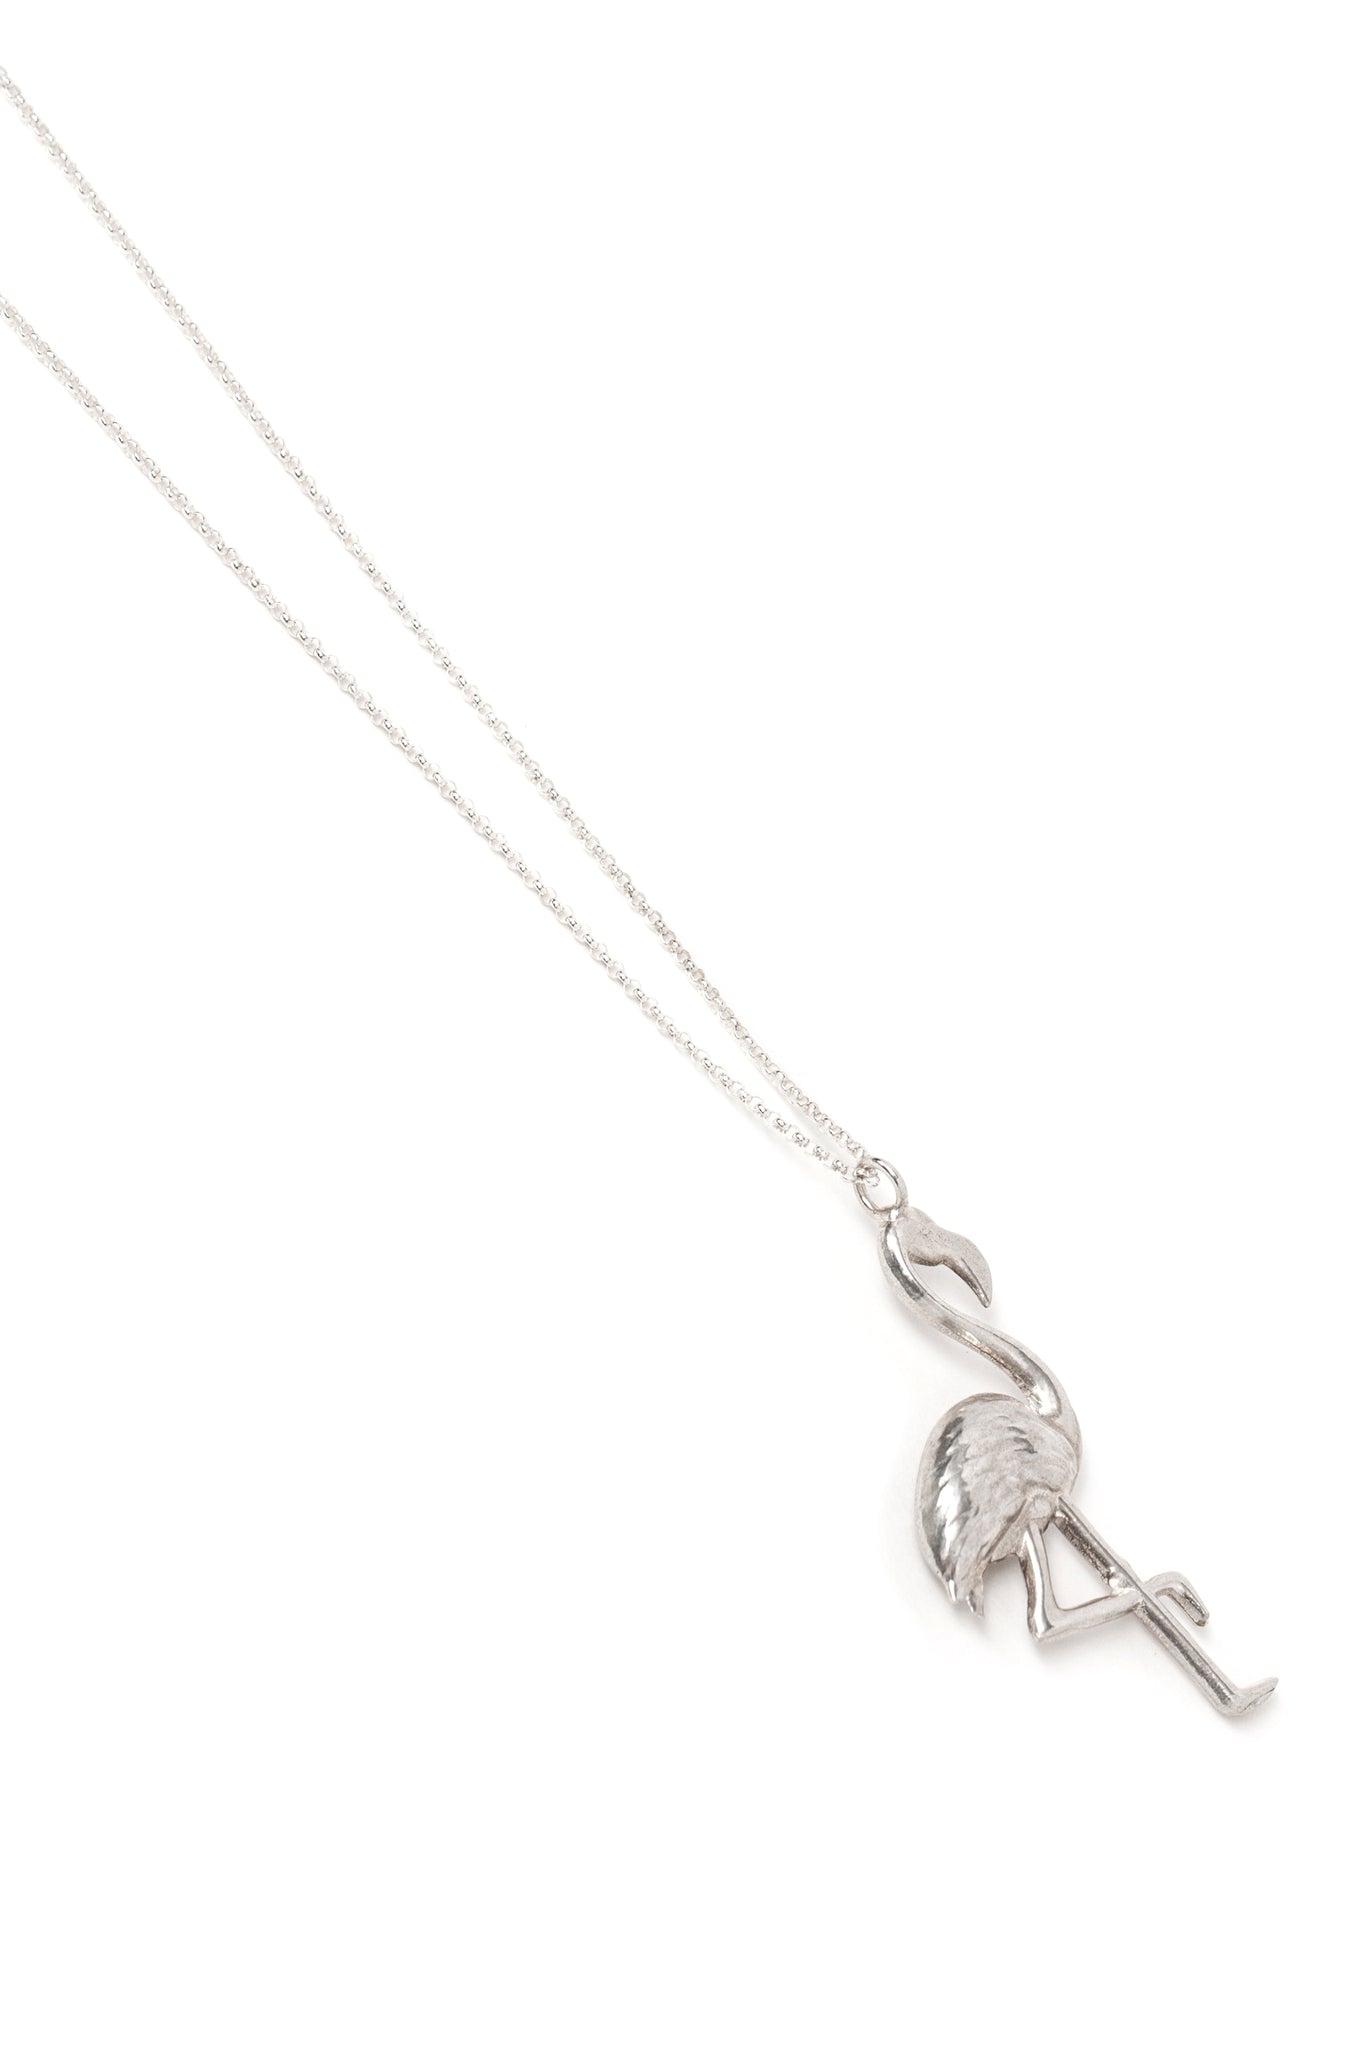 Cast Silver Flamingo Necklace on a Silver Chain